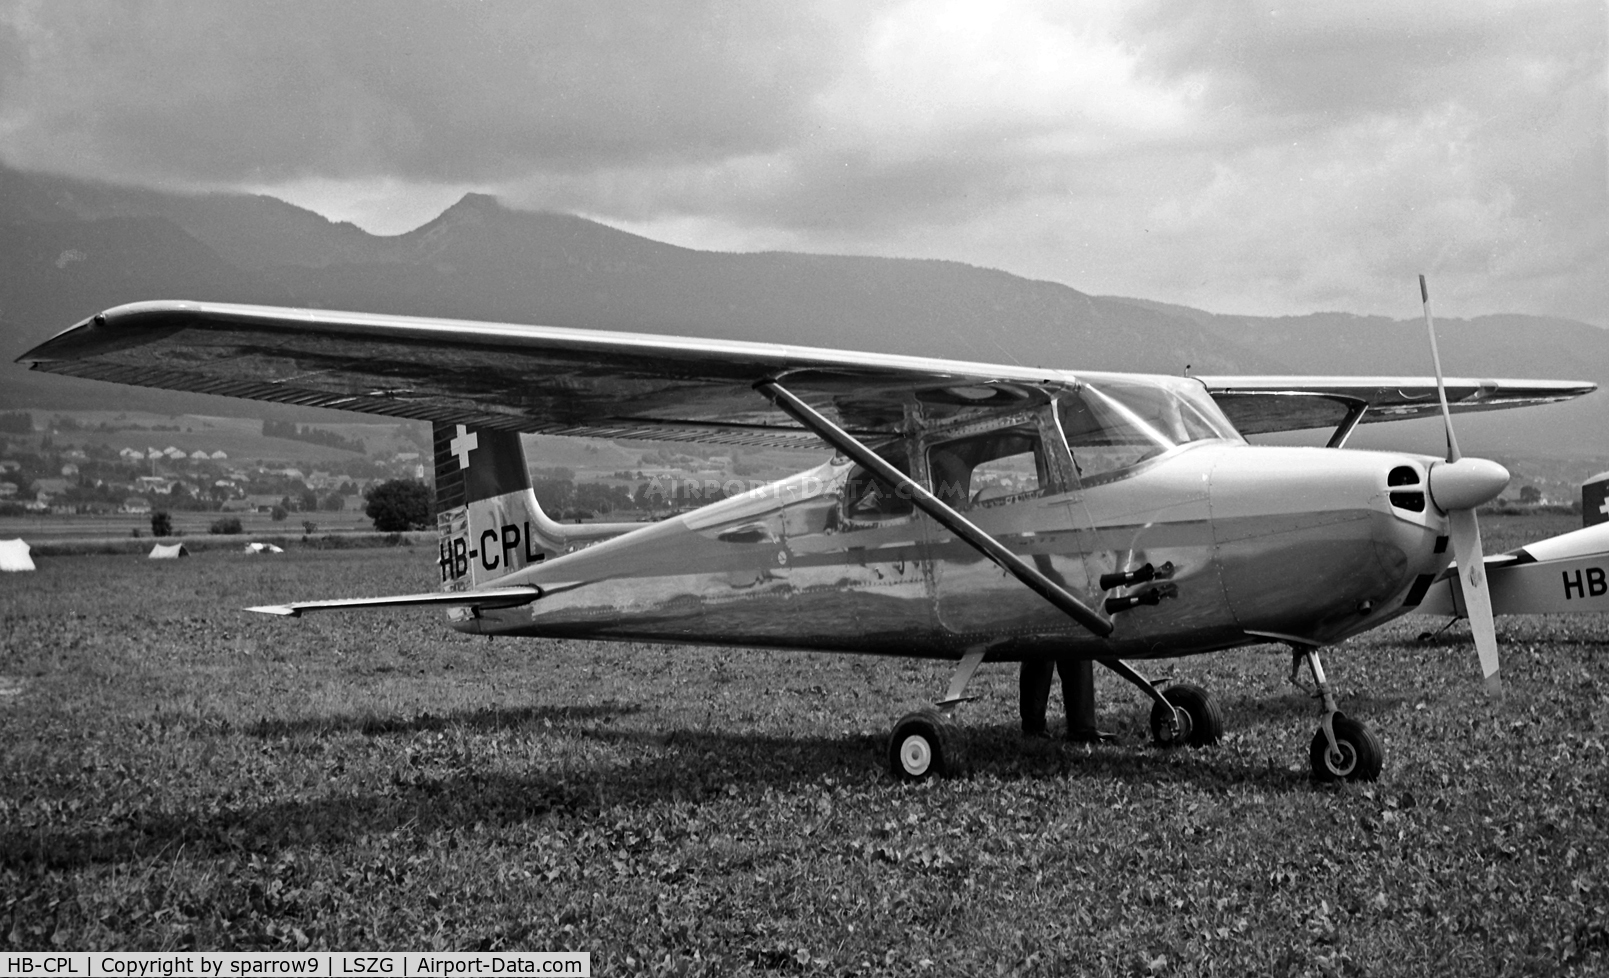 HB-CPL, 1956 Cessna 172 C/N 29046, In original paint-scheme, at Grenchen between 1958 and 1961